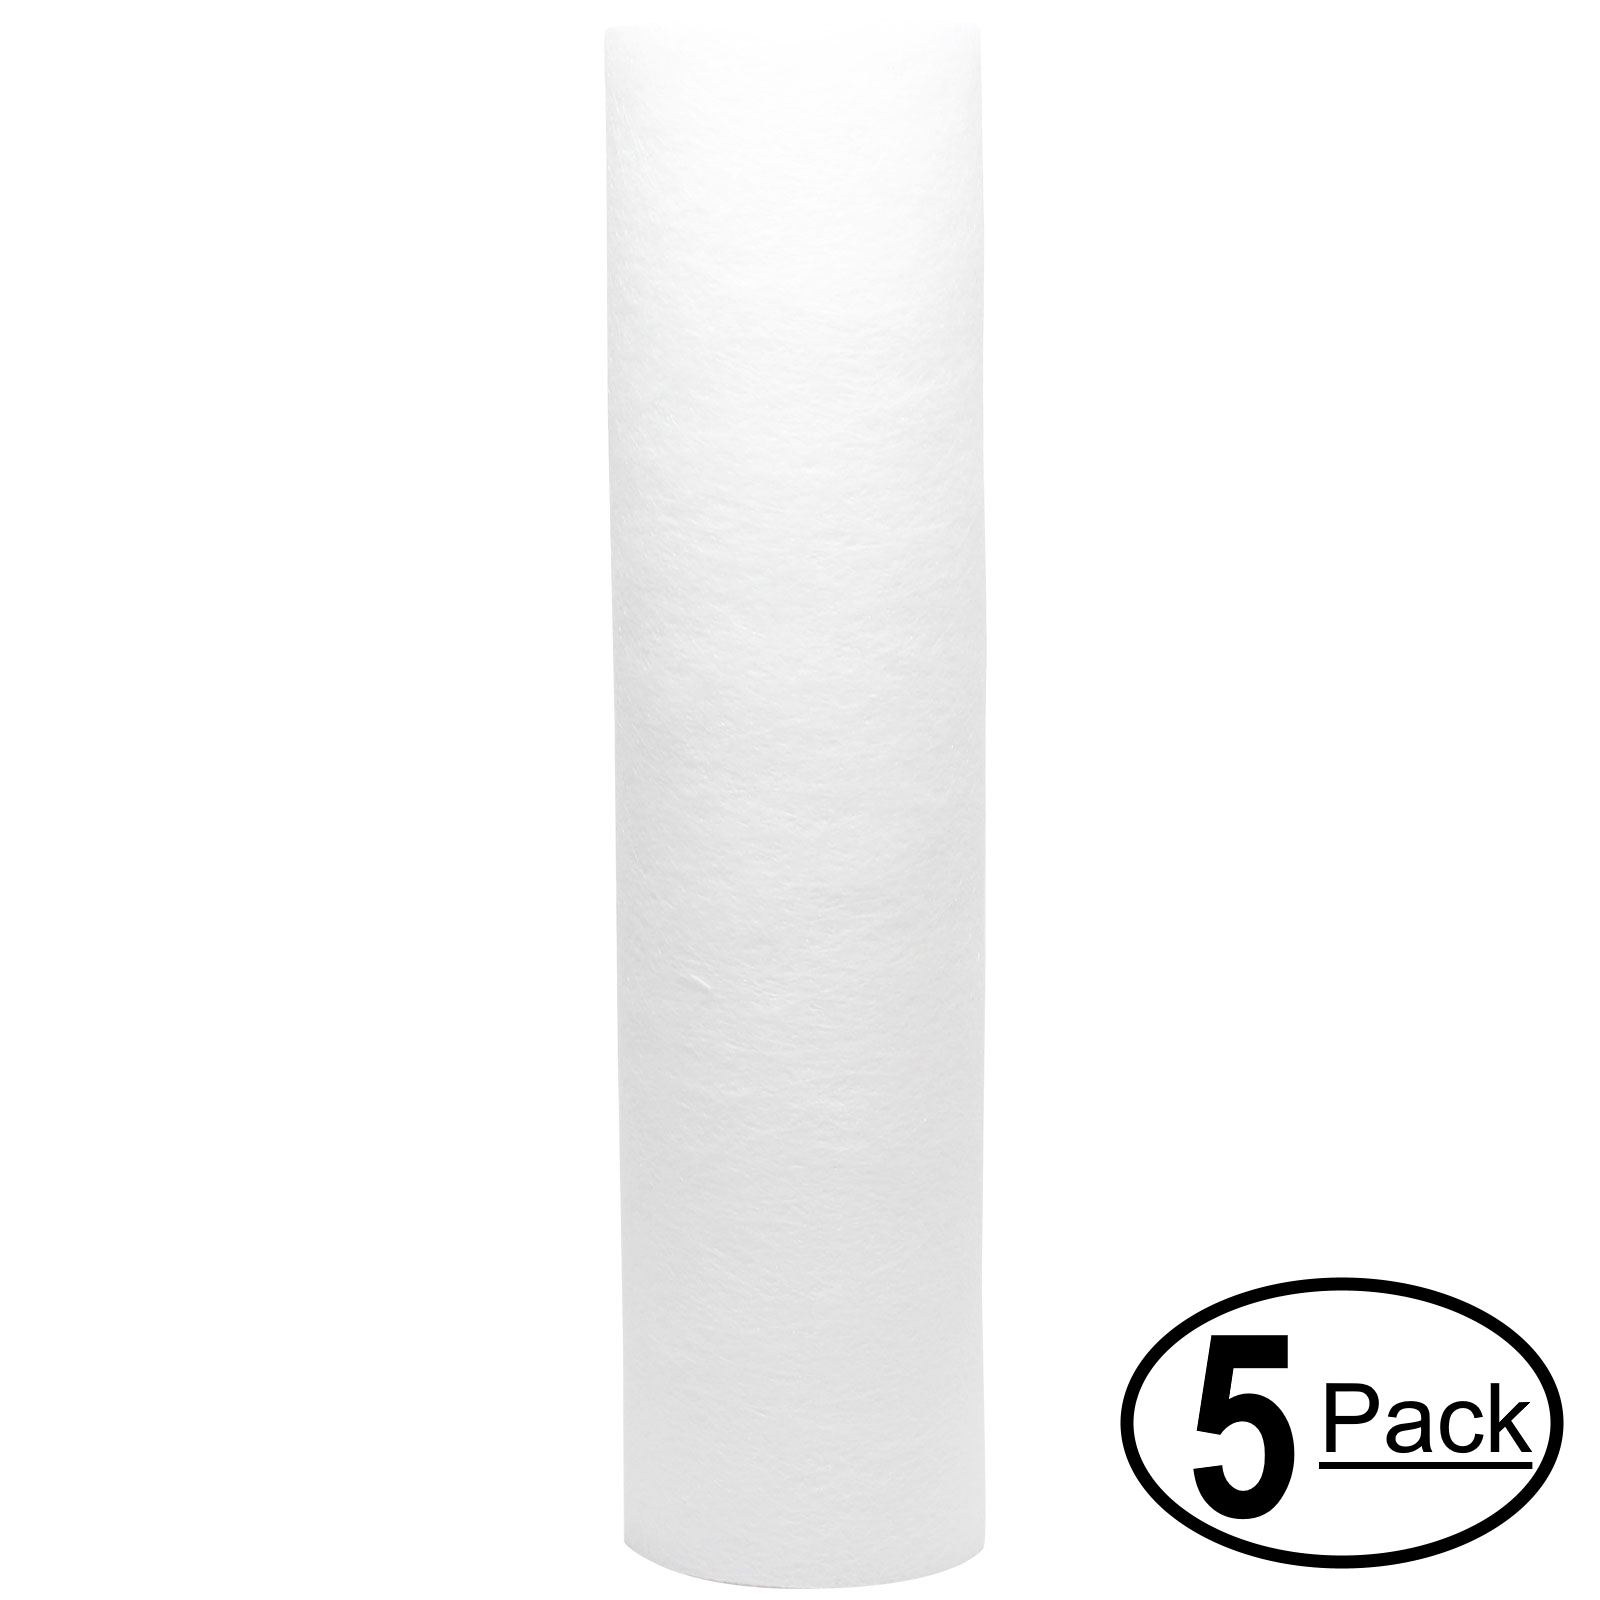 5-Pack Replacement for GE GXWH20S Polypropylene Sediment Filter - Universal 10-inch 5-Micron Cartridge for GE SINGLE SUMP WHOLE HOME FILTRATION SYSTEM - Denali Pure Brand - image 1 of 4